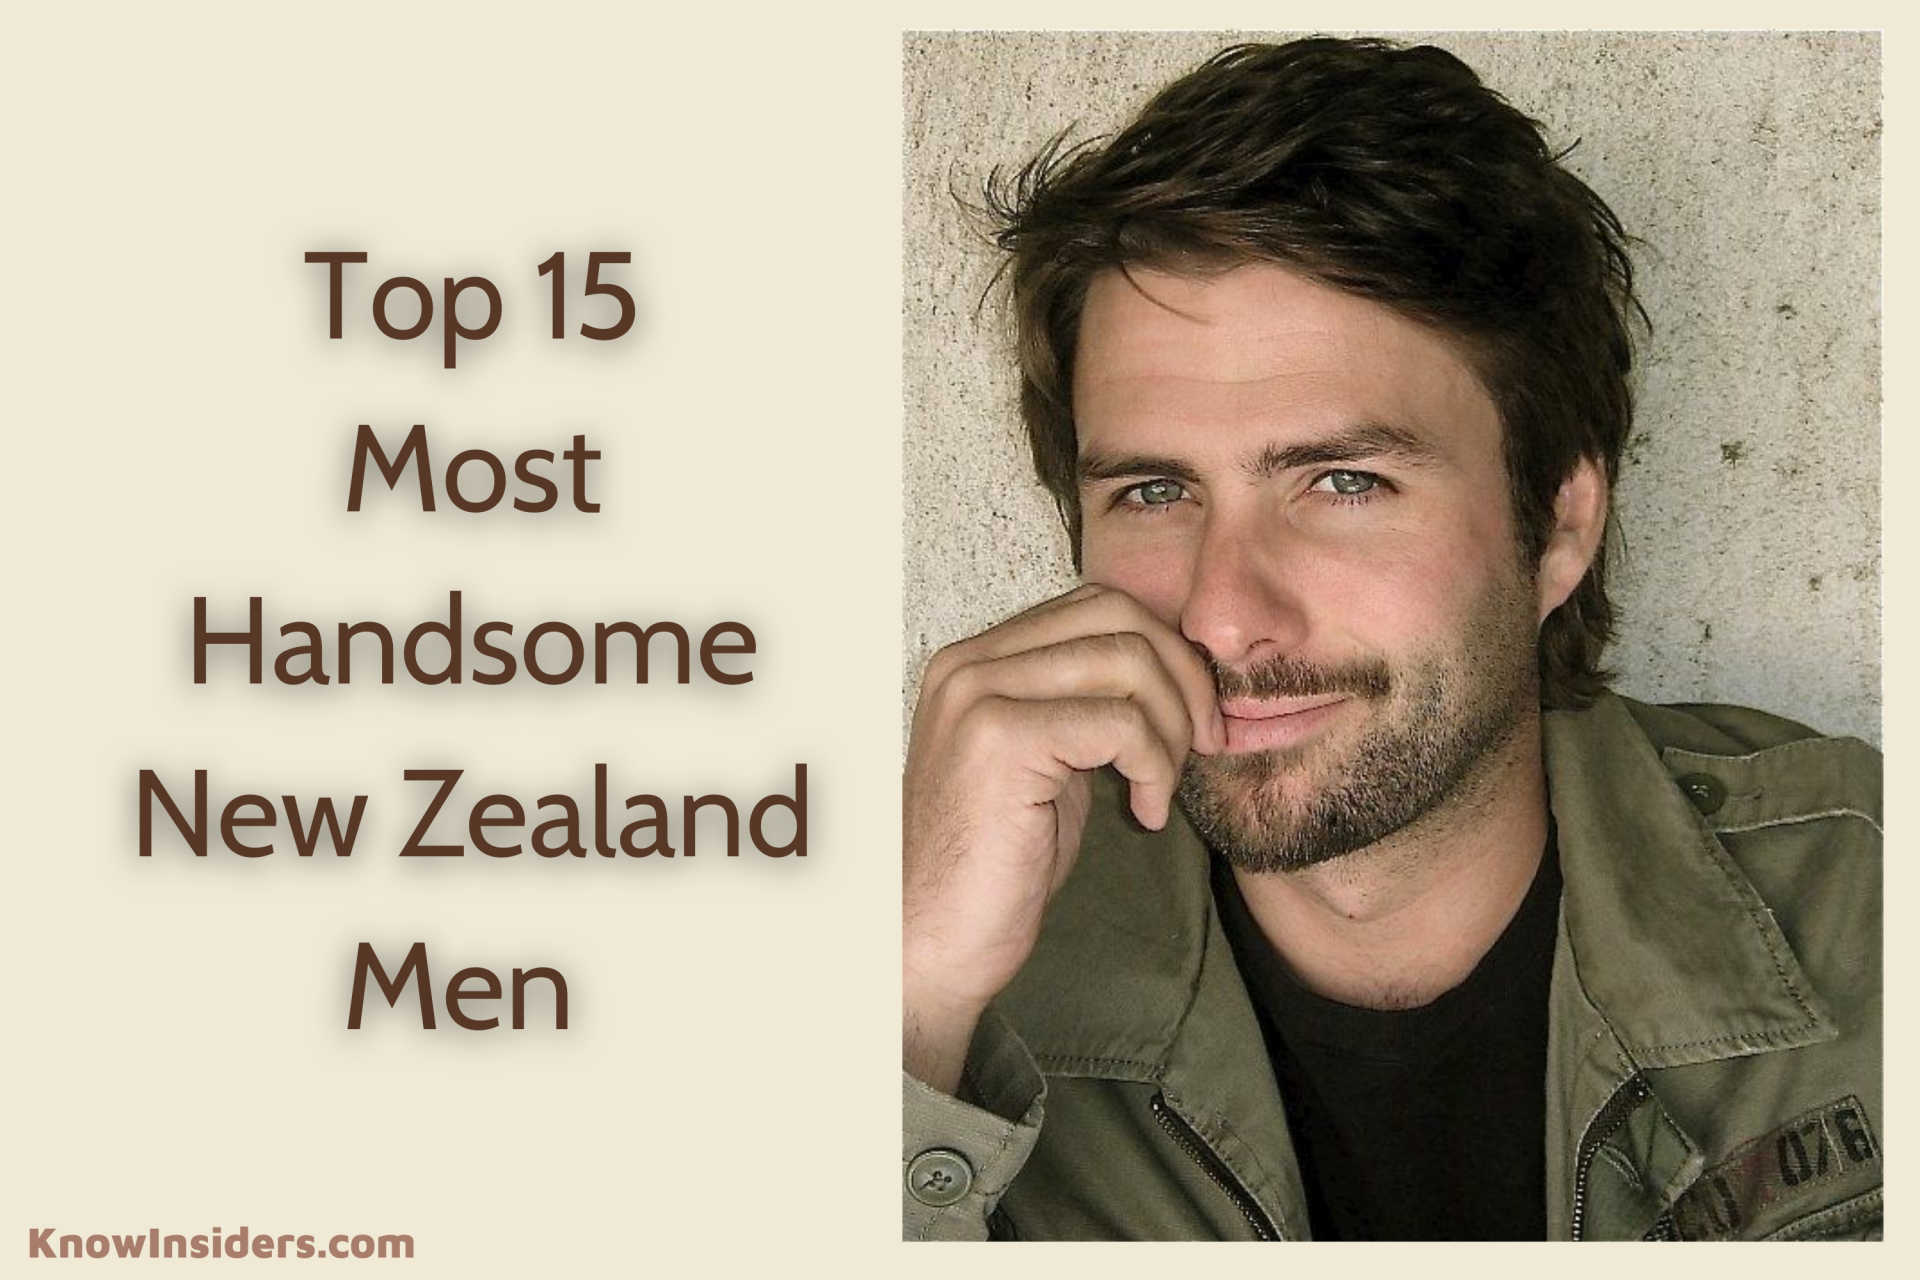 Top 15 Most Handsome and Hottest Men in New Zealand - Updated